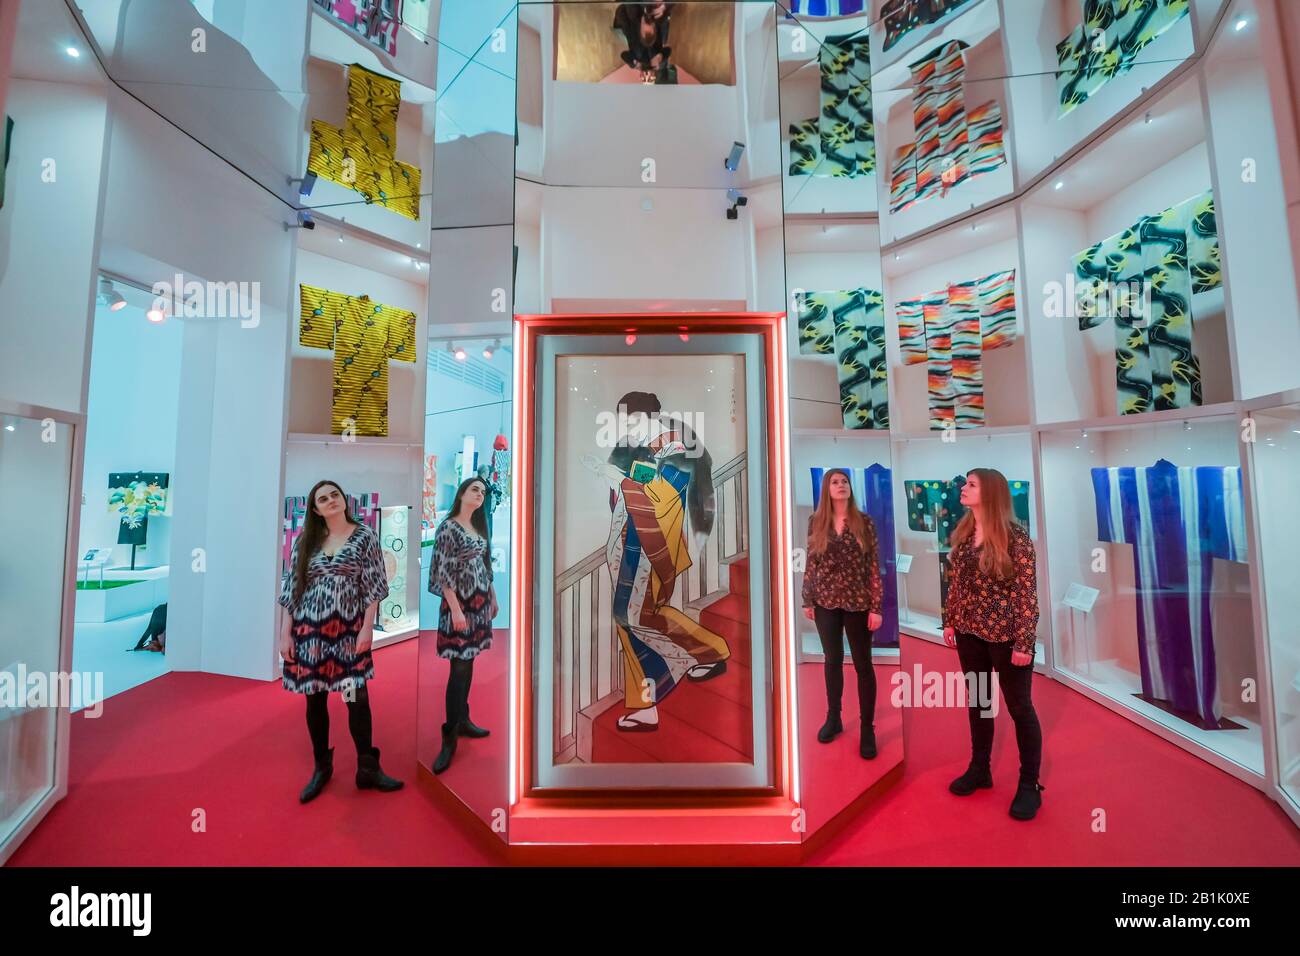 London, UK. 26th 2020. Kimono: Kyoto to Catwalk - a new exhibition at the V&A explores a symbol of Japan. The kimono is often perceived as traditional, timeless and unchanging but